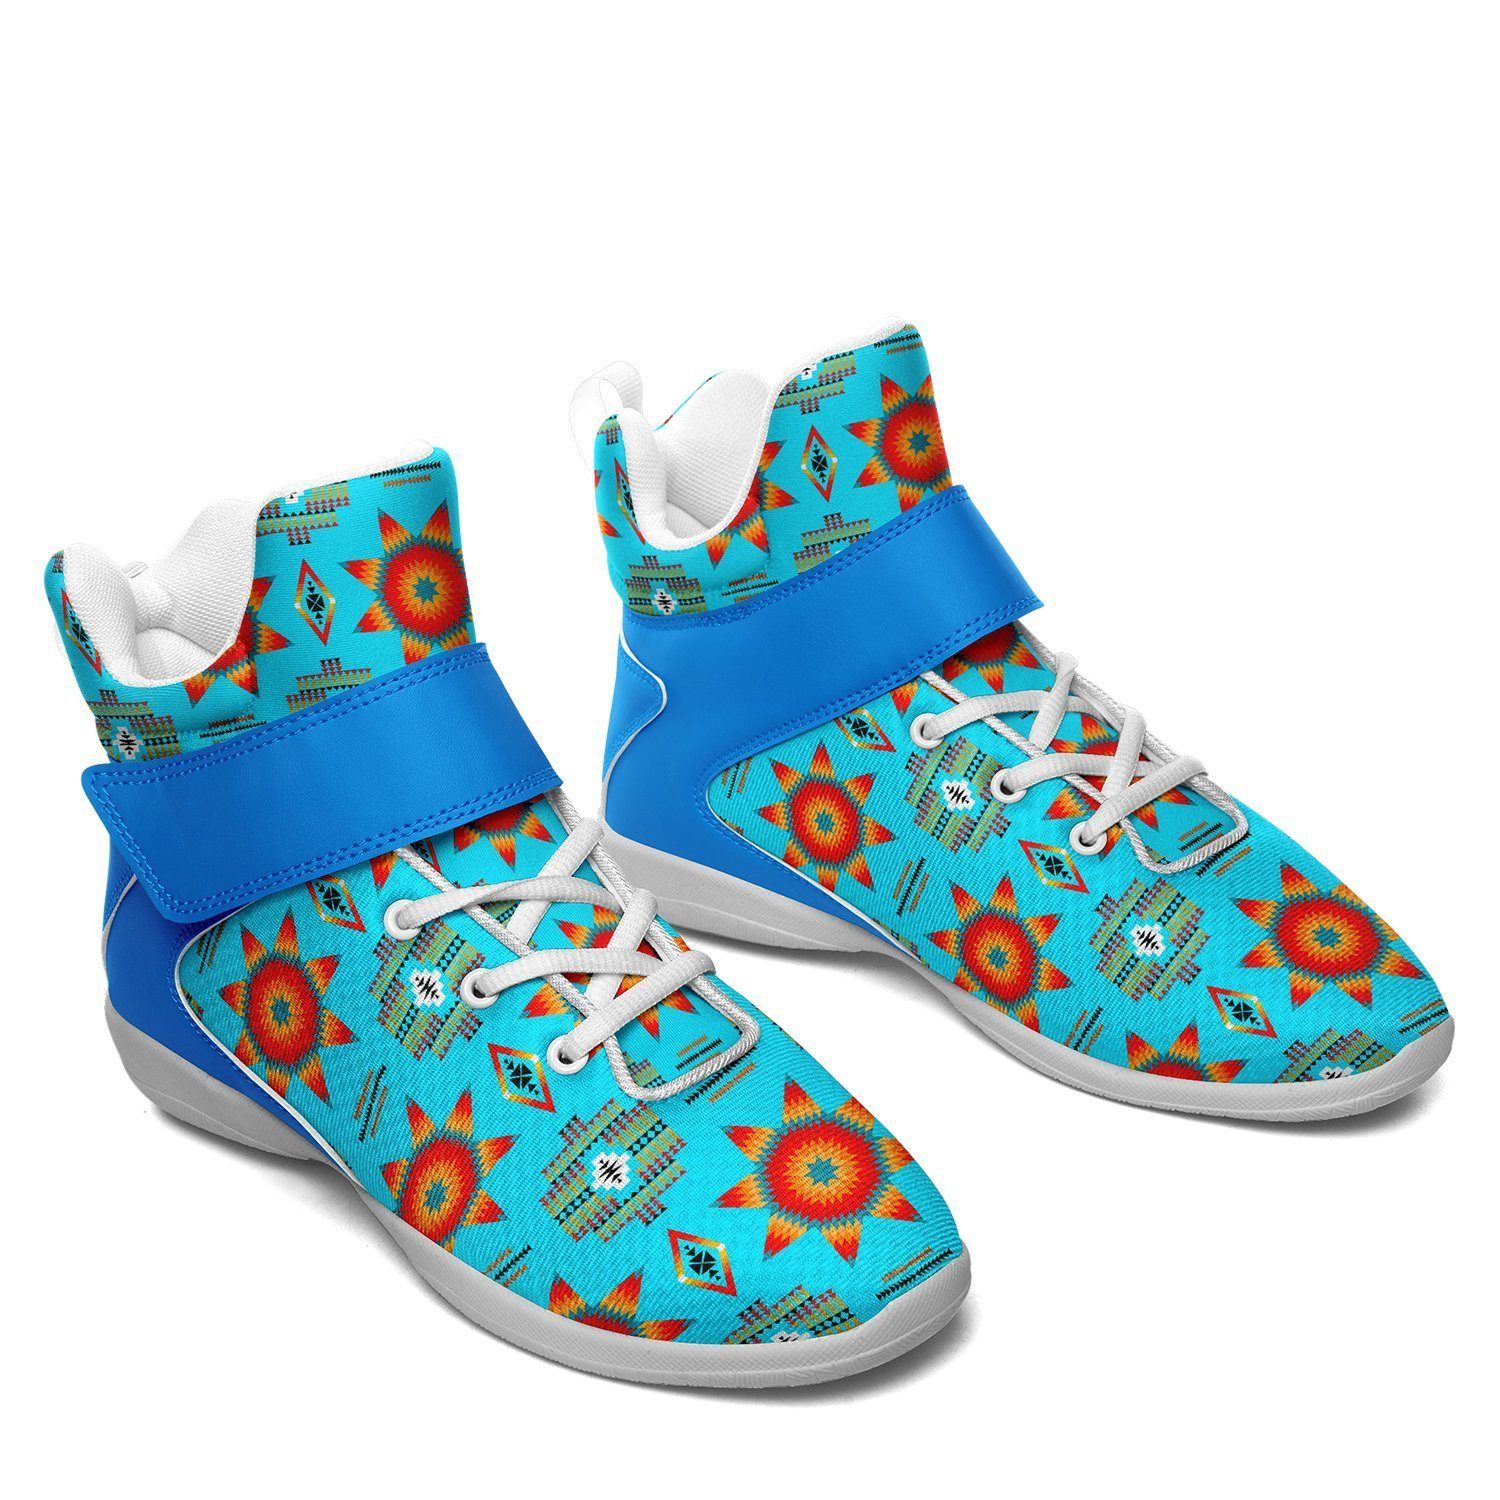 Rising Star Harvest Moon Ipottaa Basketball / Sport High Top Shoes - White Sole 49 Dzine 